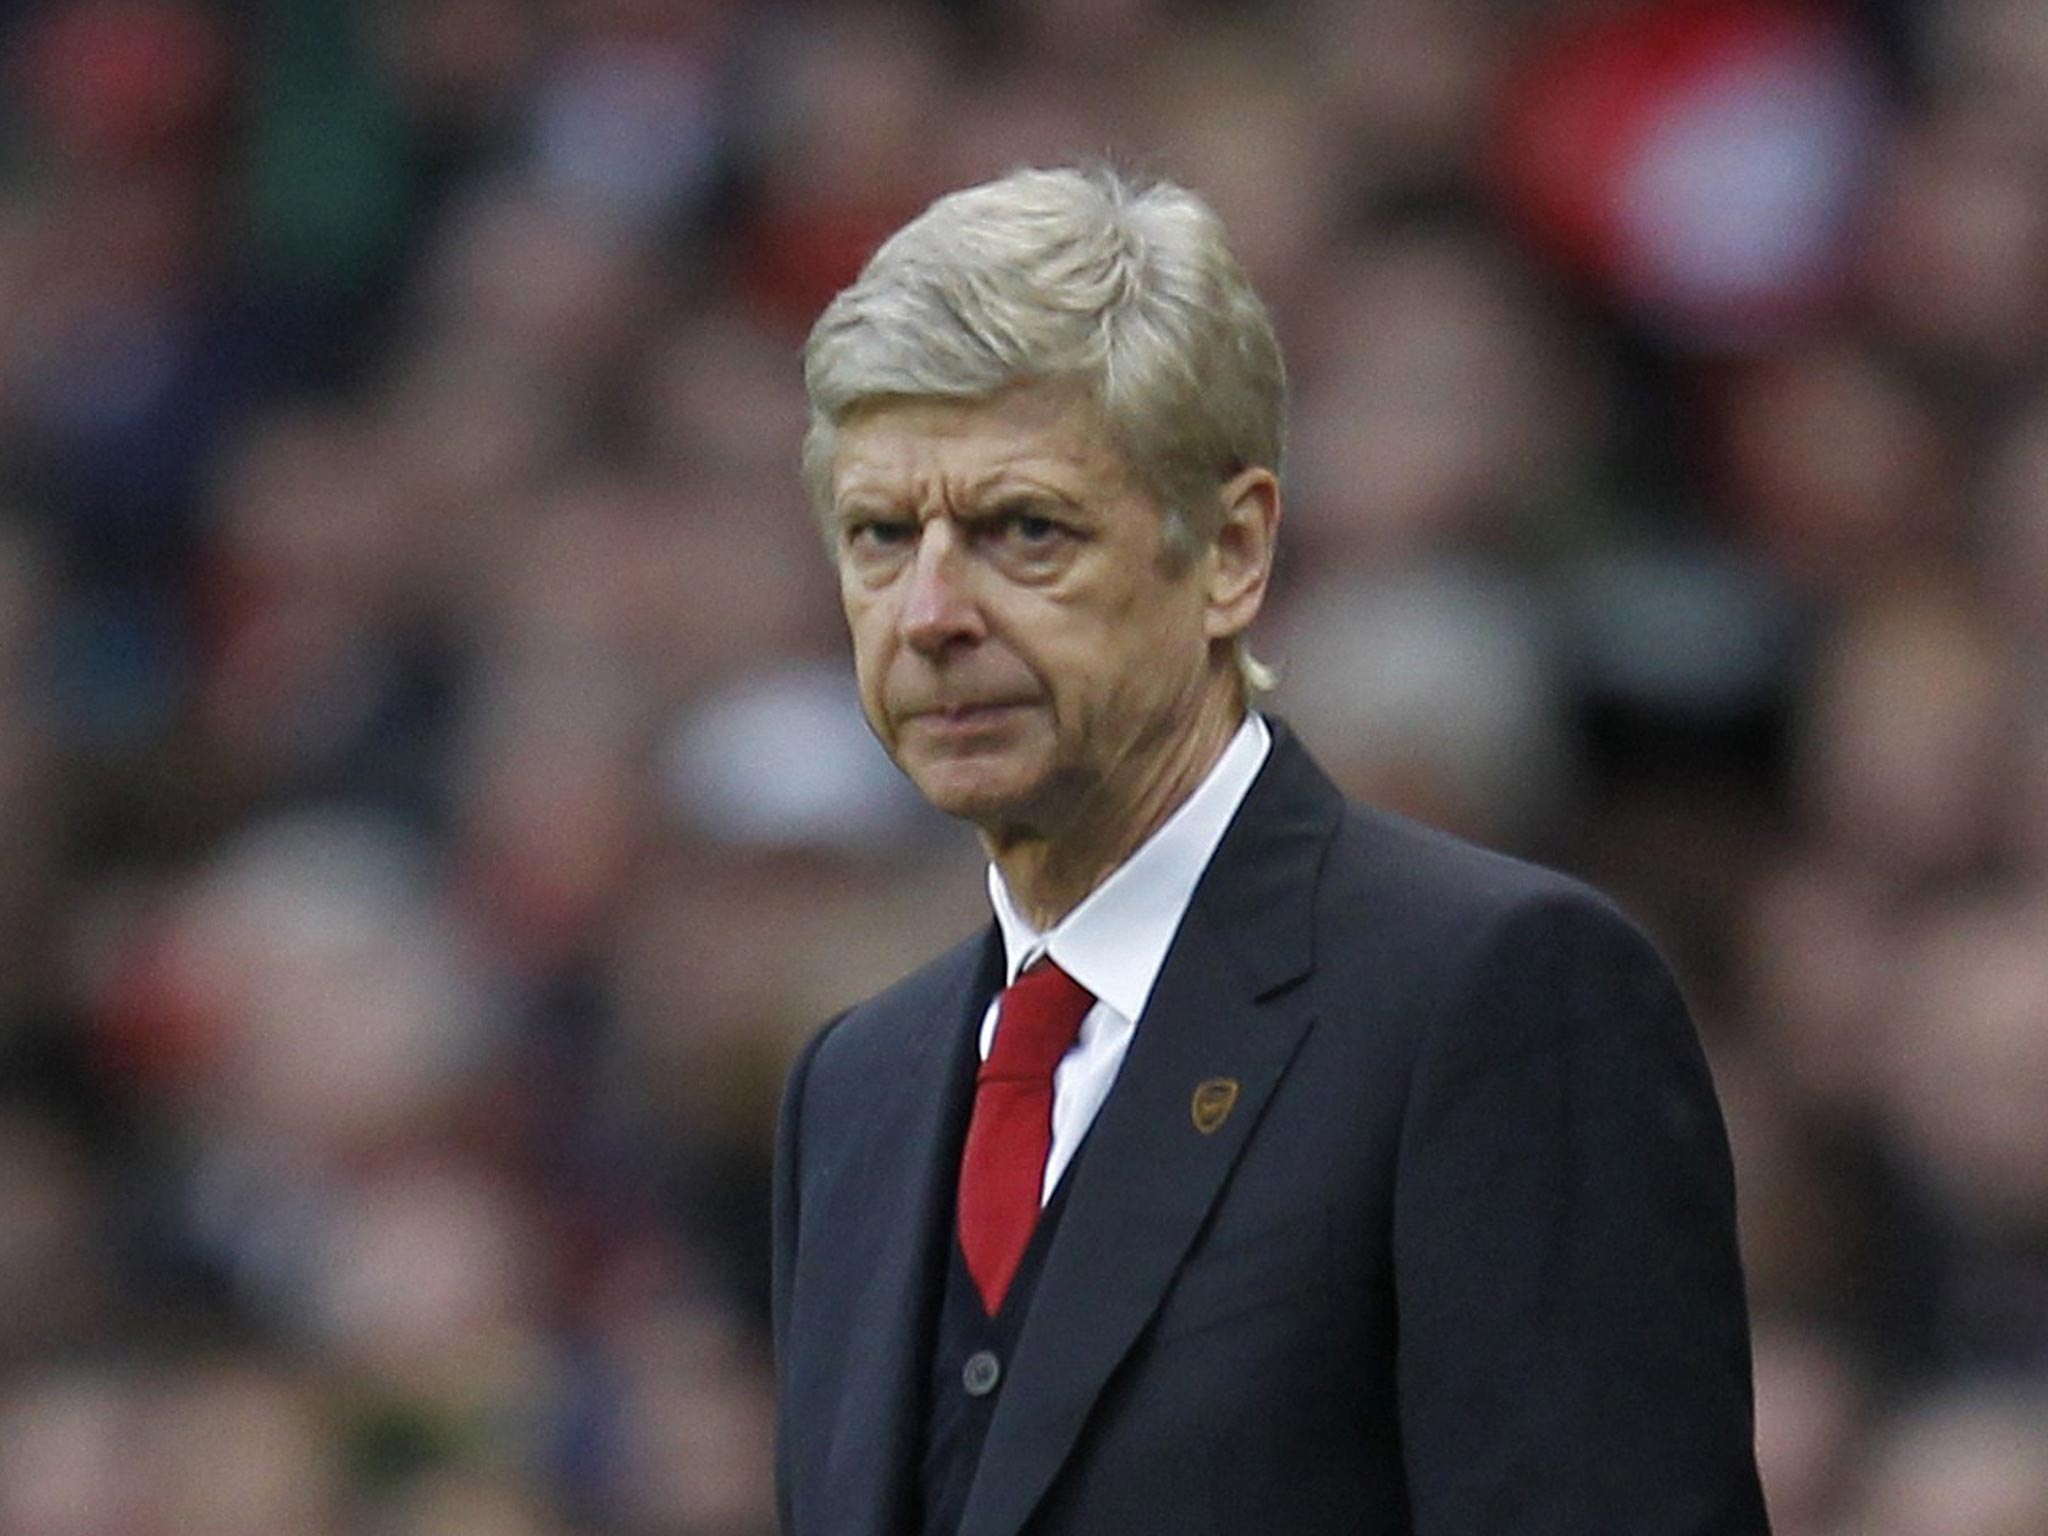 Wenger says March is a good month for Arsenal to show their strength